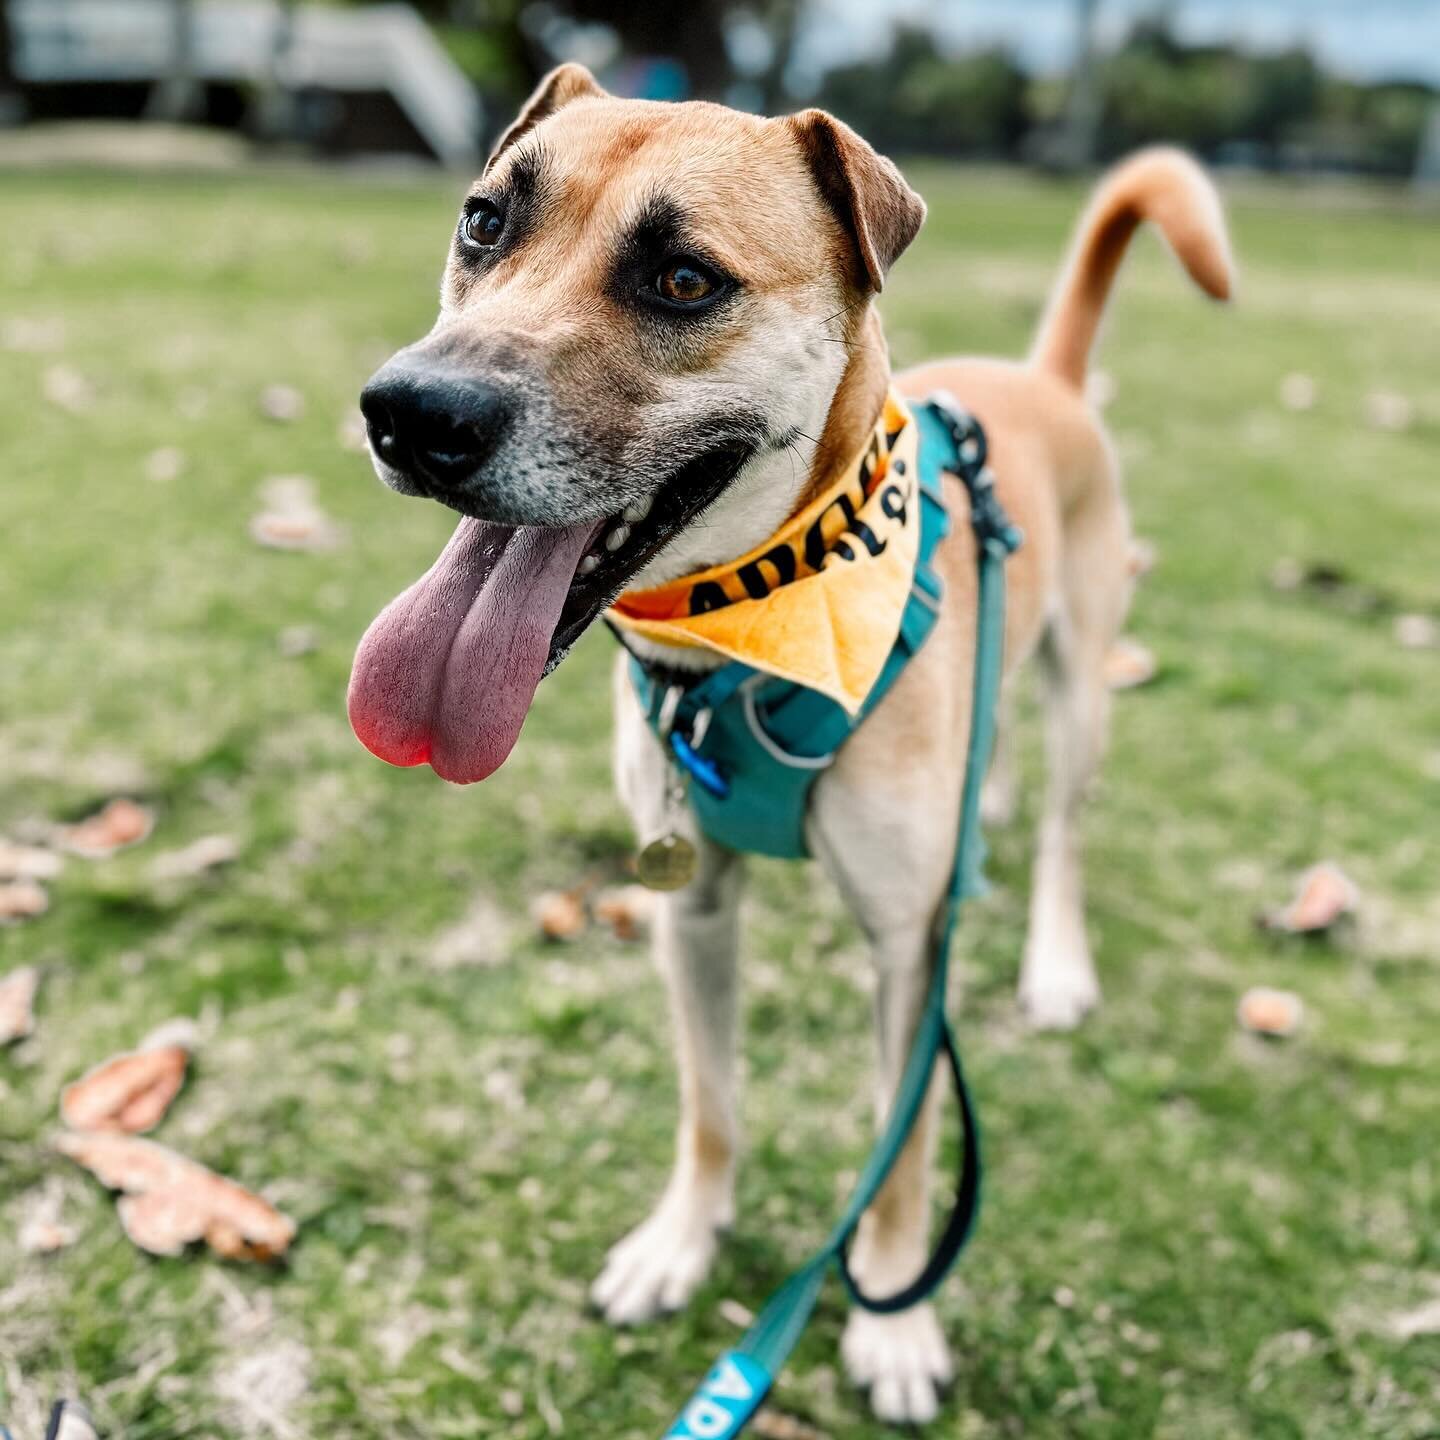 Meet Max! He&rsquo;s available for adoption here on the big Island 🥹

The @hawaiiislandhumanesociety has the cutest program that you can take shelter dogs out for a field trip when you visit! 

Max was the sweetest boy and we took him for long walks